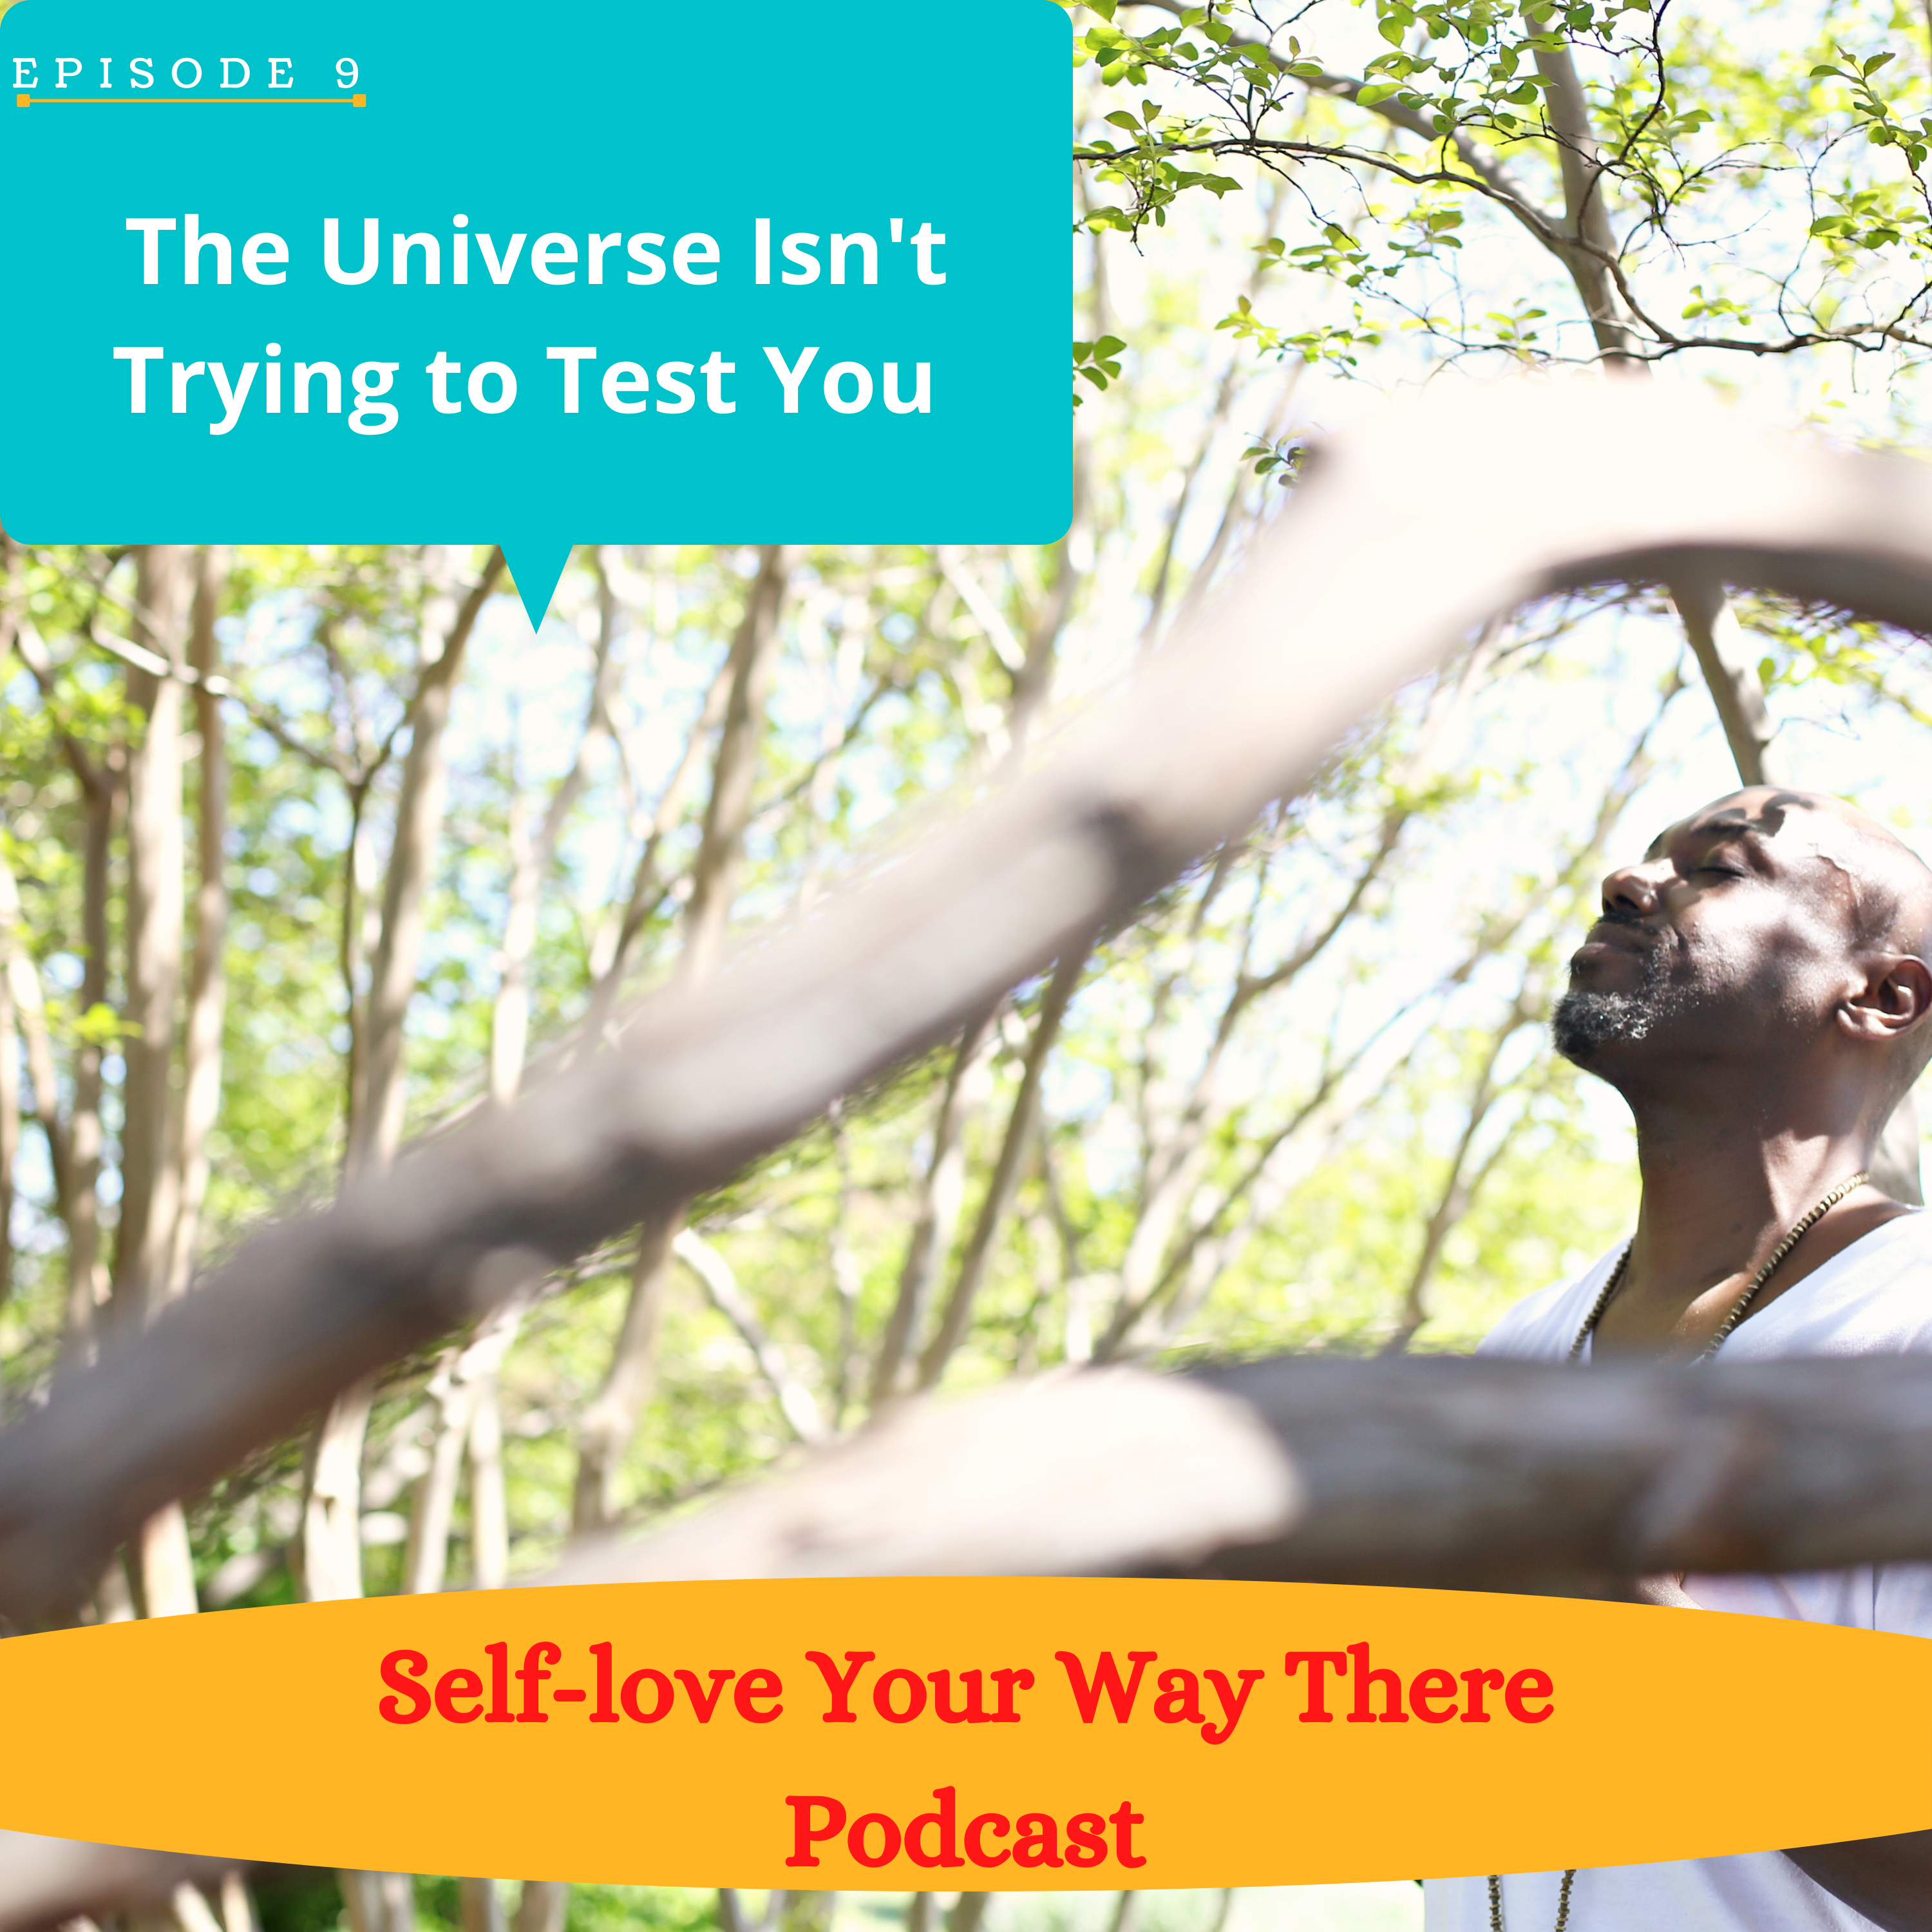 The Universe Isn’t Trying to Test You